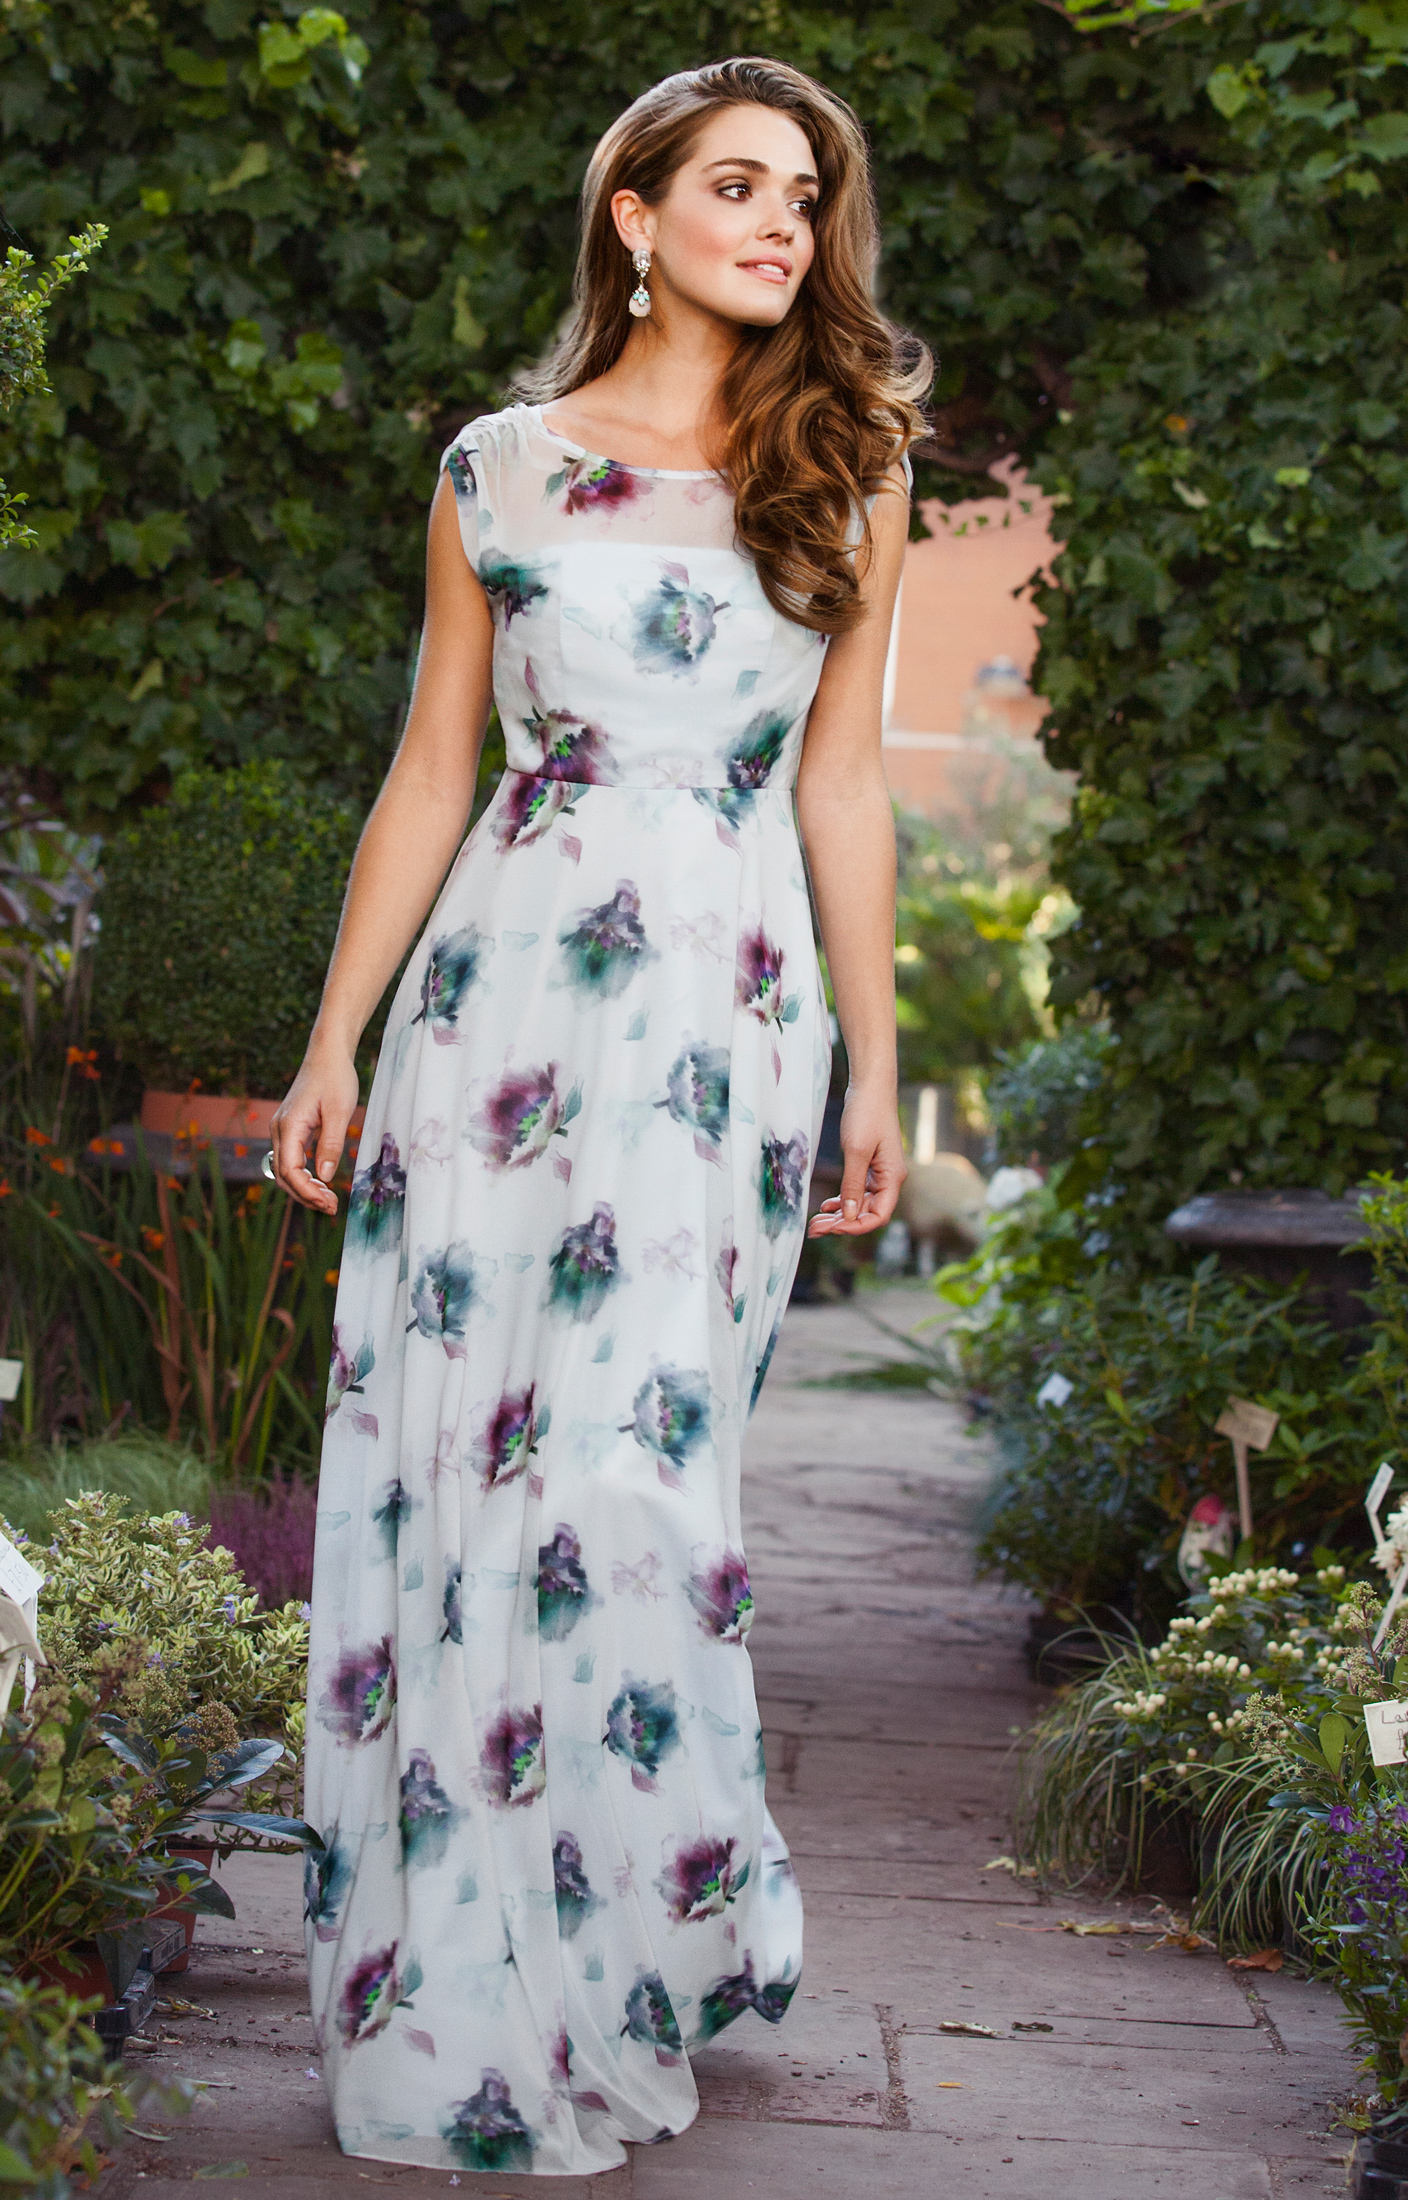 Floral-Print A-Line Gown by Badgley Mishcka